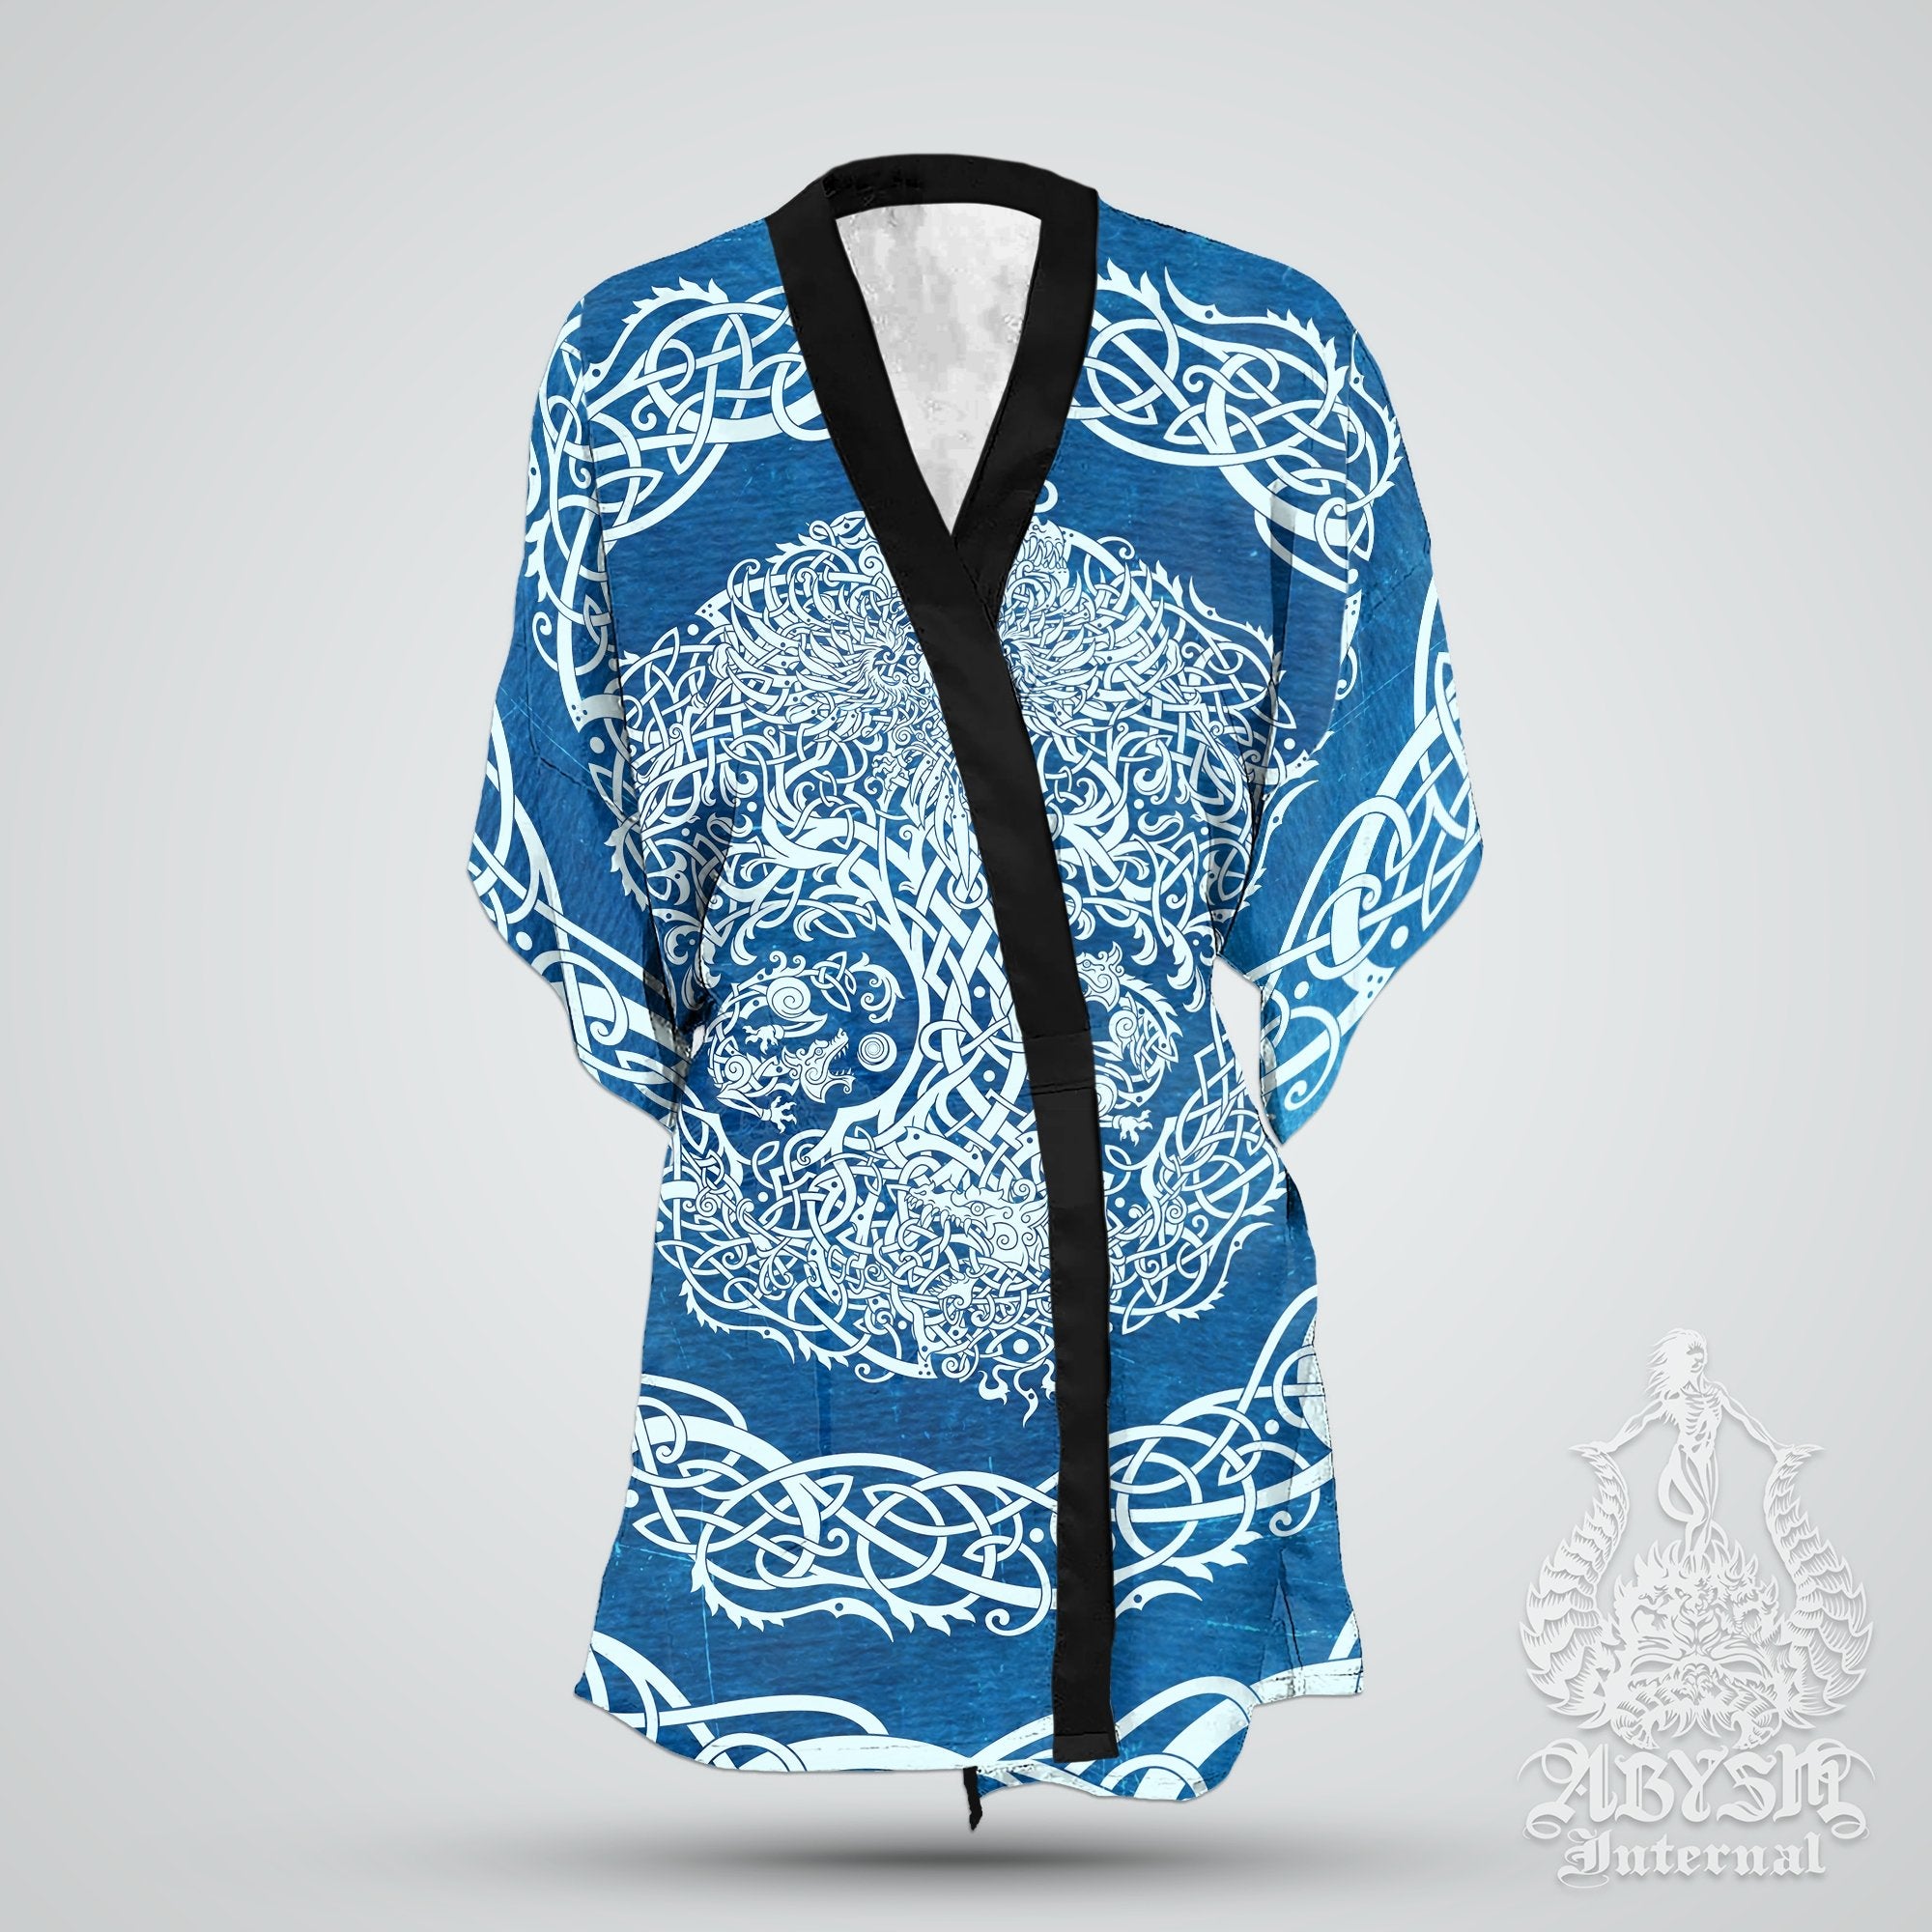 Viking Cover Up, Beach Outfit, Yggdrasil Party Kimono, Summer Festival Robe, Norse Indie and Alternative Clothing, Unisex - Tree of Life, Blue White - Abysm Internal